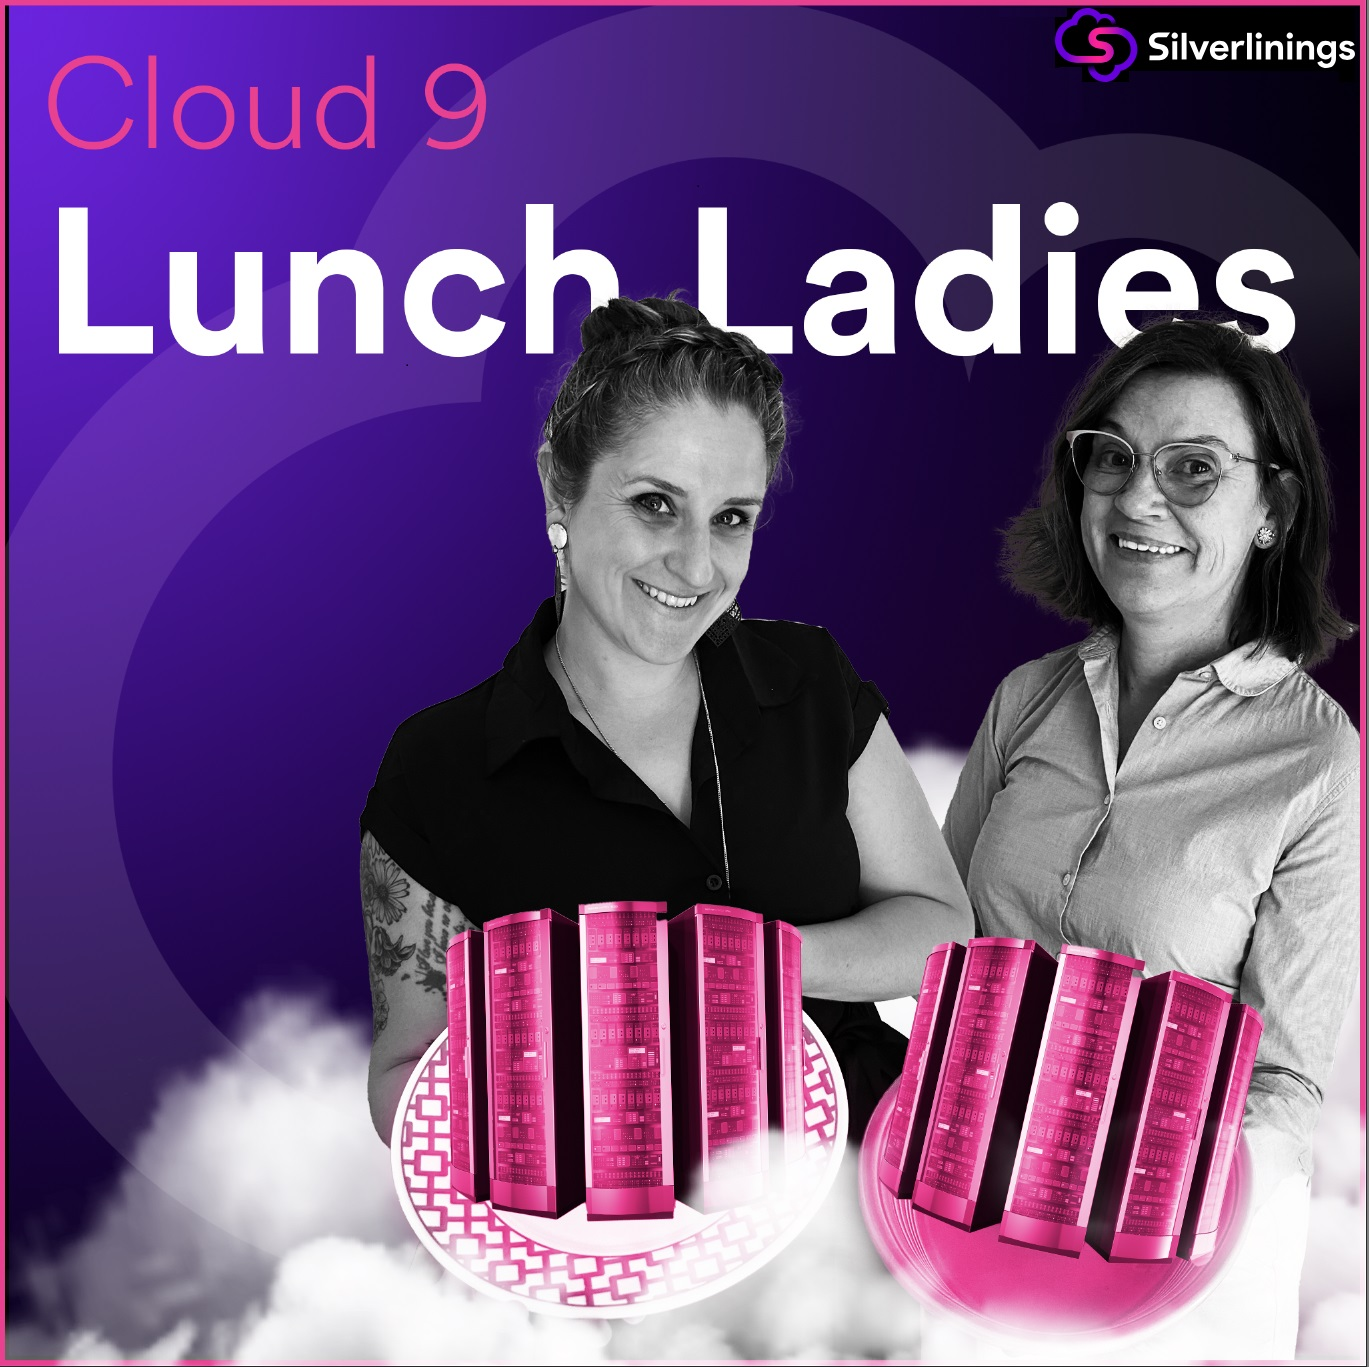 Cloud 9: Lunch Ladies News Wrap - More on Cisco and Splunk, Ericsson, MWC Las Vegas and mayonnaise!